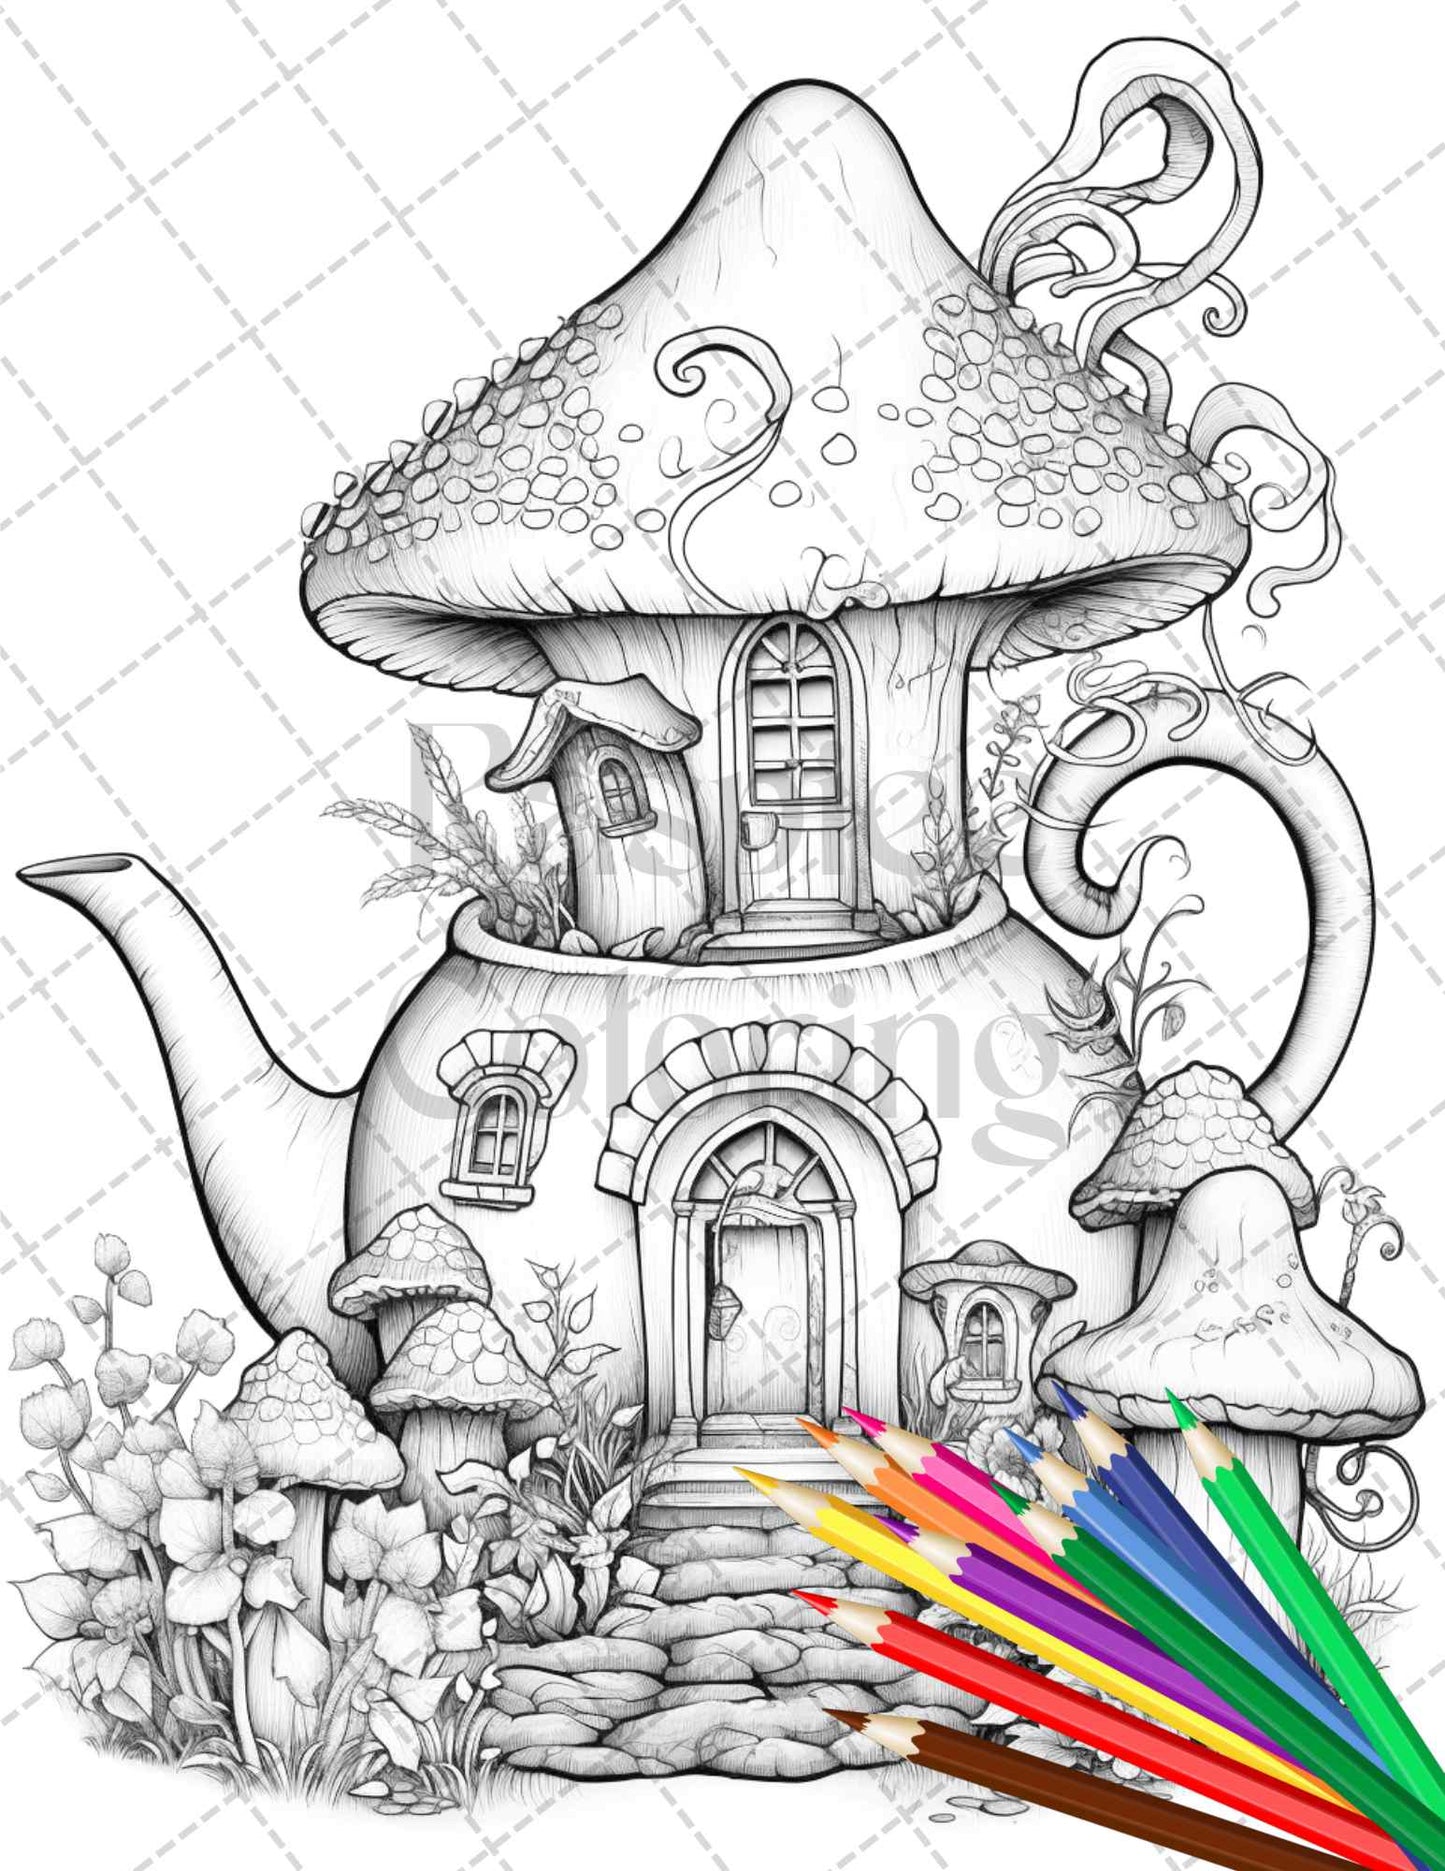 teapot fairy house coloring page, grayscale coloring printable, adult coloring artwork, printable coloring page, fairy house illustration